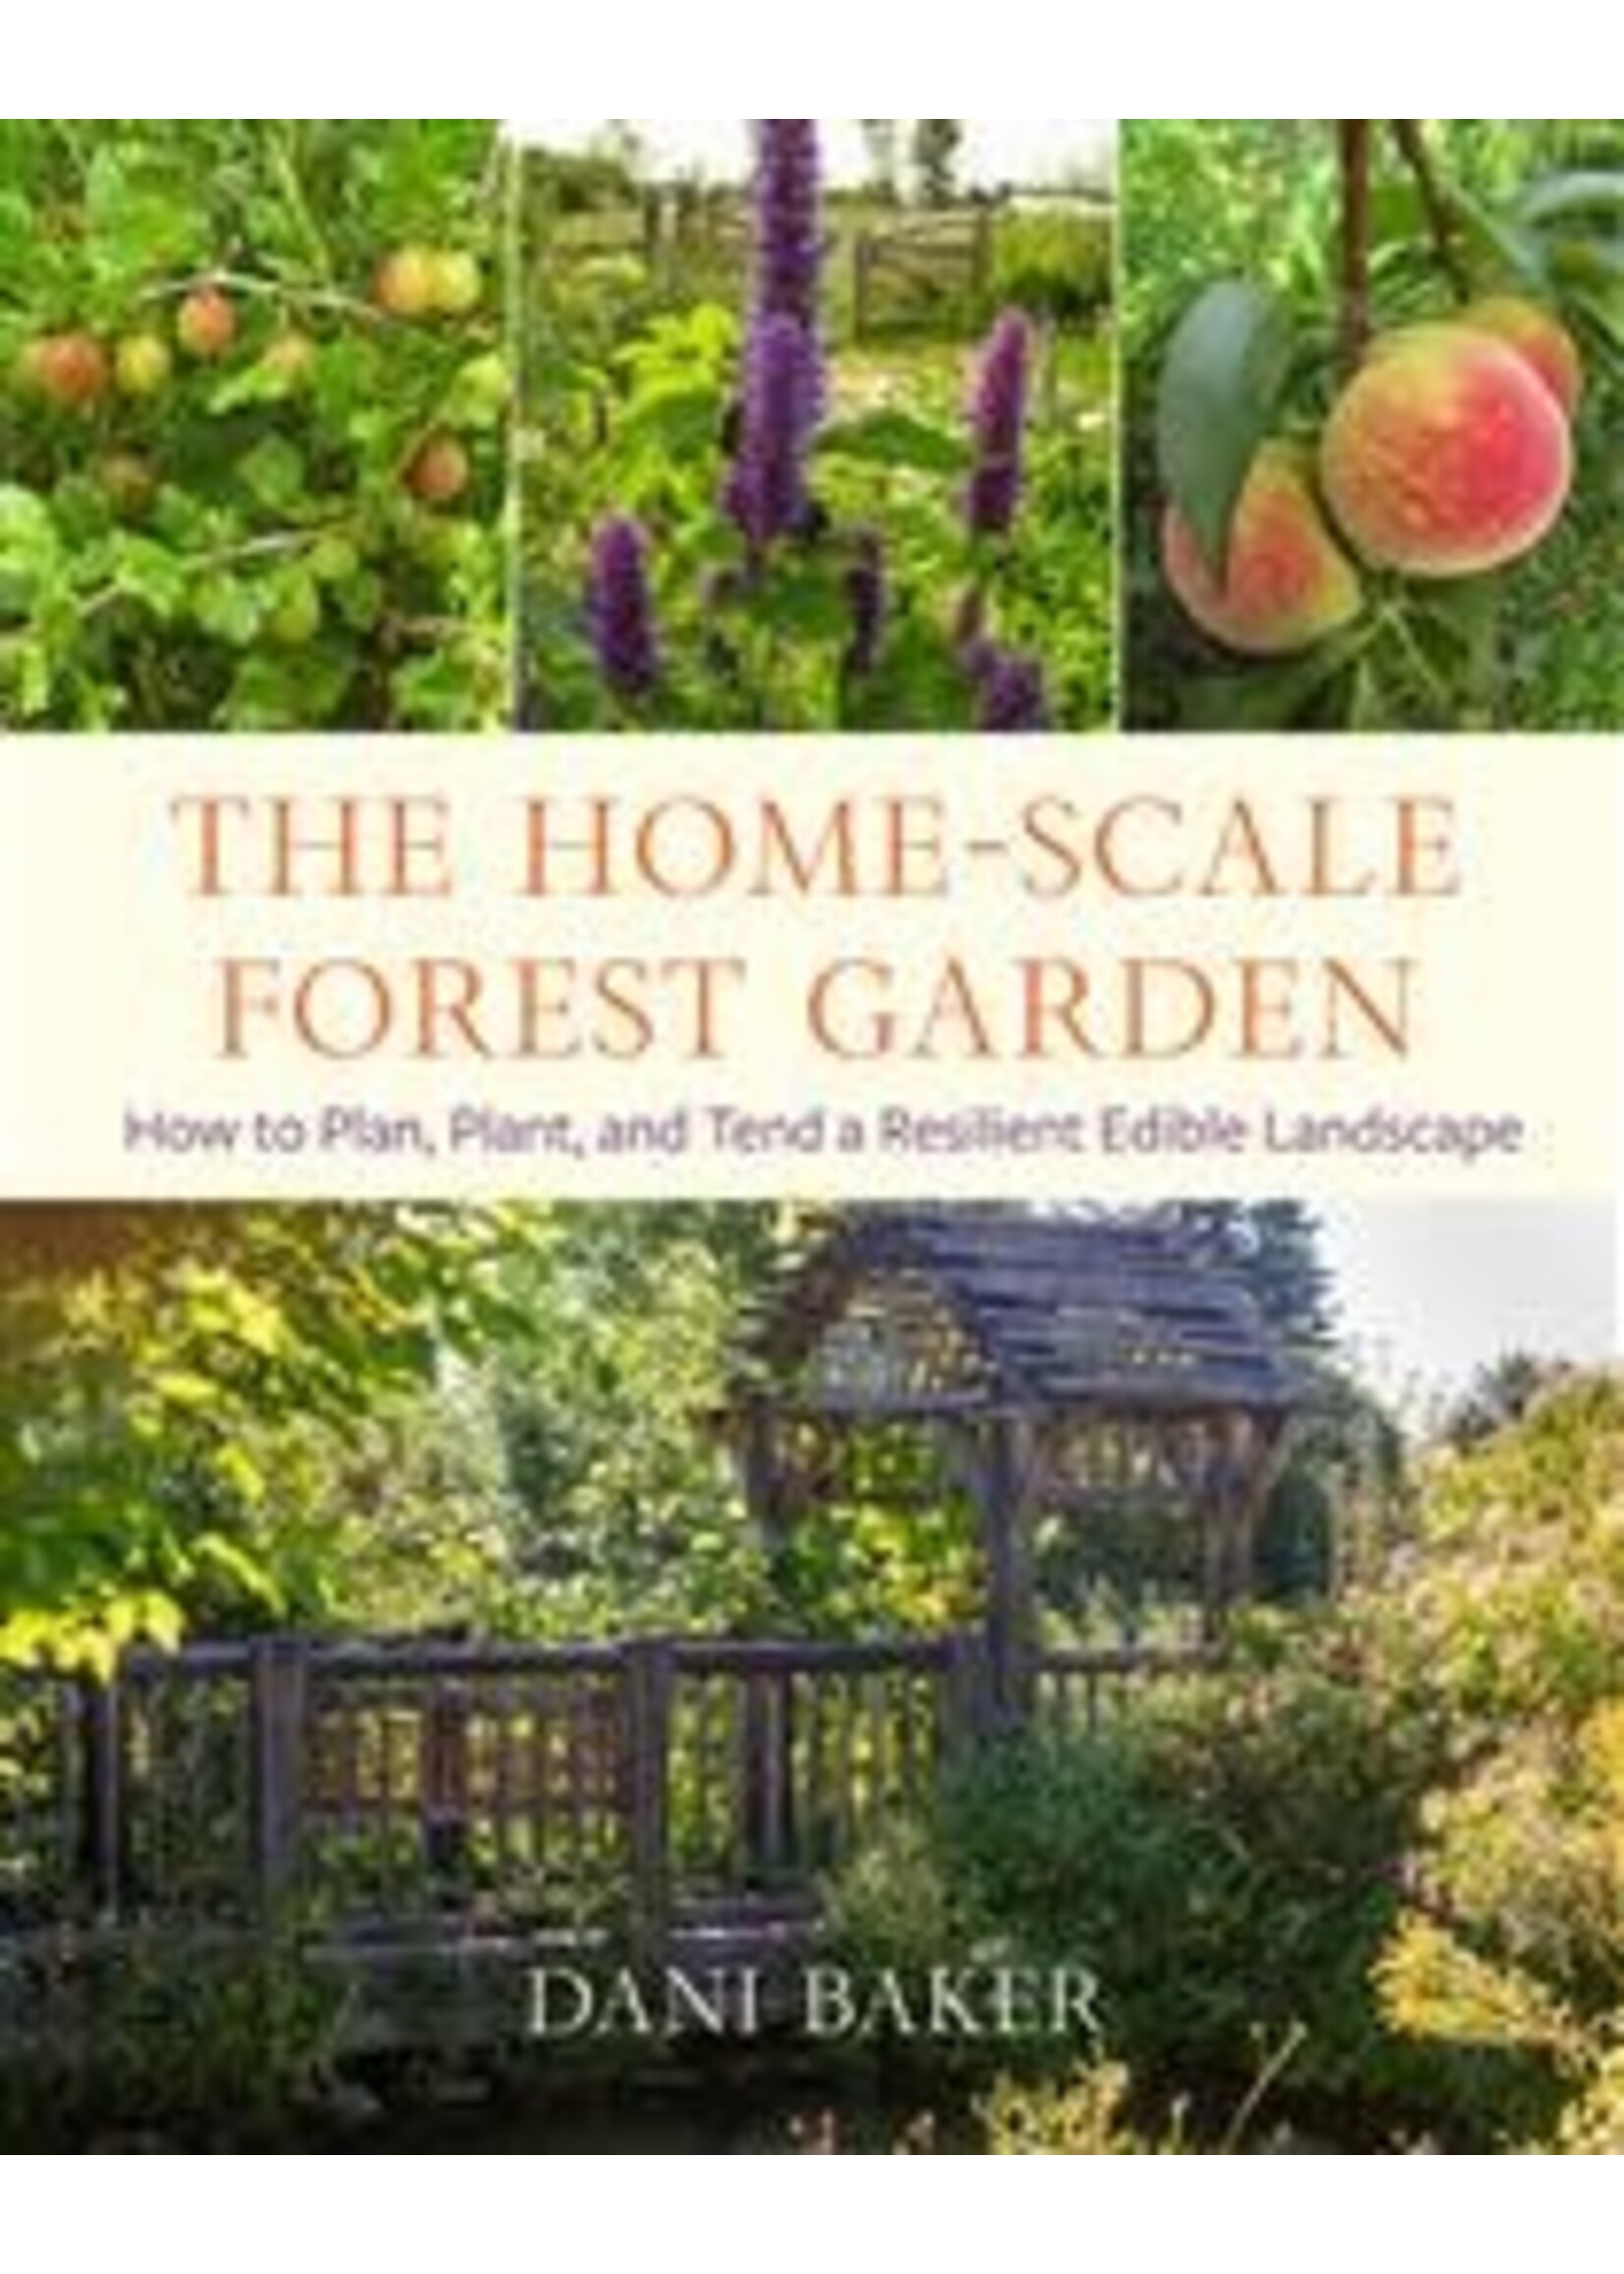 The Home-Scale Forest Garden: How to Plan, Plant, and Tend a Resilient Edible Landscape by Dani Baker